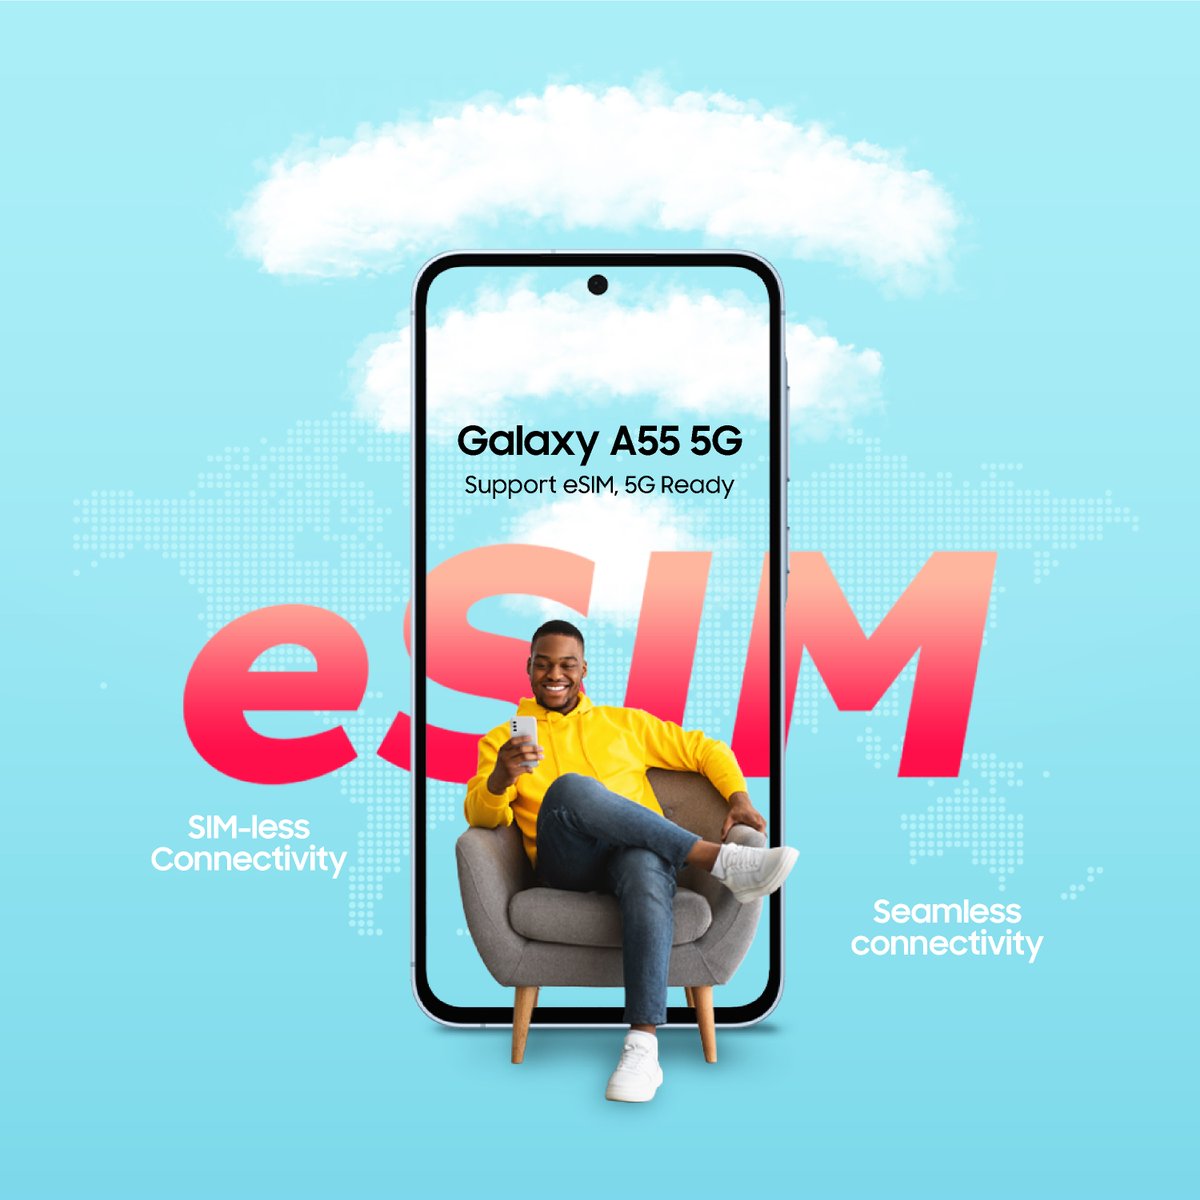 Enjoy the power of SIM-less connectivity with Galaxy A55—eSim enabled and 5G ready for seamless digital experiences!

Available at a Samsung authorized store near you.

#GalaxyA35 5G
#AwesomeLikeNeverbefore
#SamsungNigeria